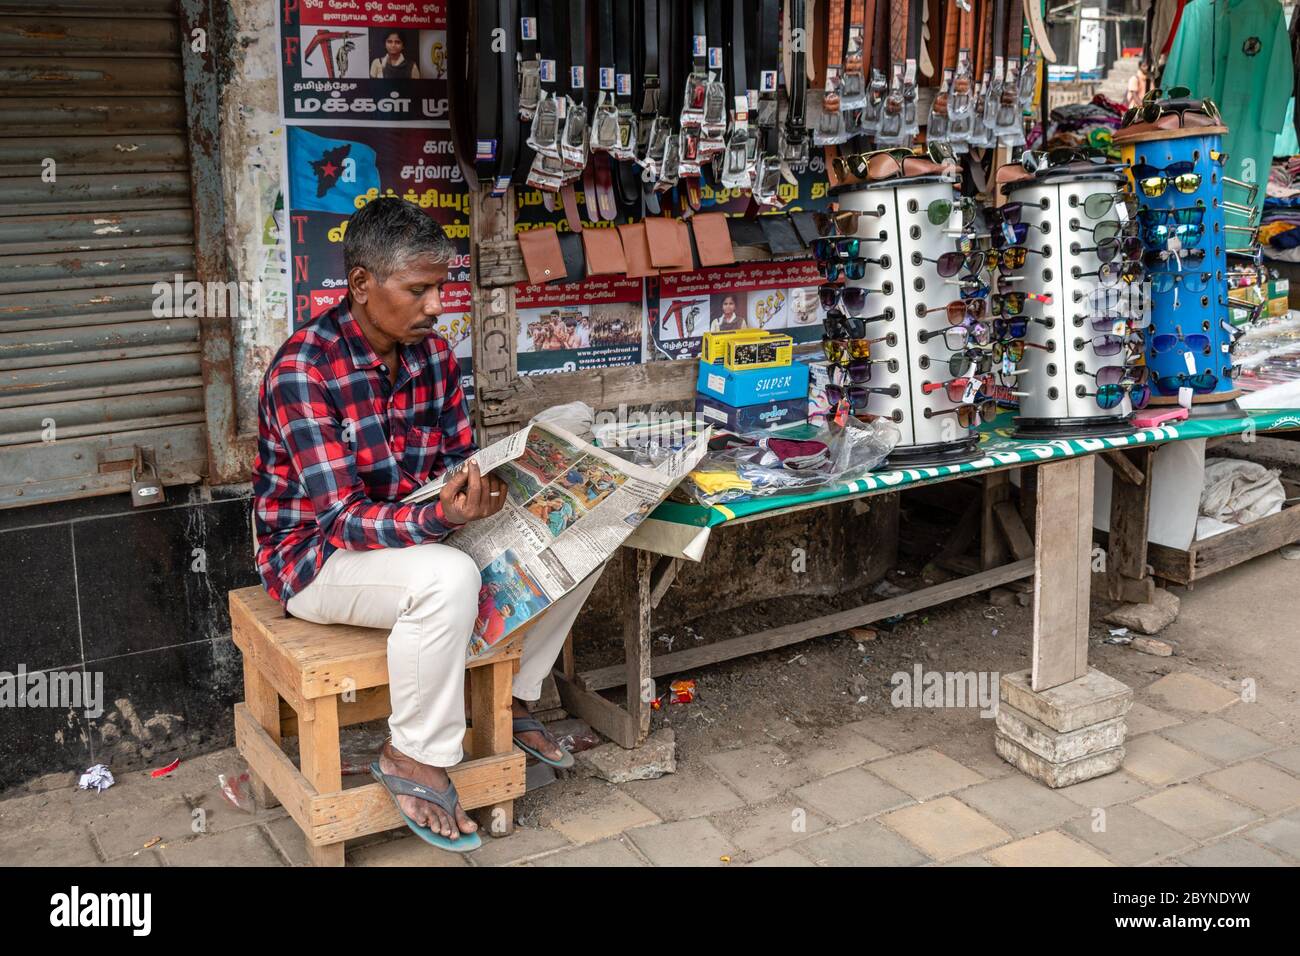 Chennai, Tamil Nadu, India - August 2018: A street vendor reading a newspaper outside his pavement shop that sells leather goods and sunglasses. Stock Photo